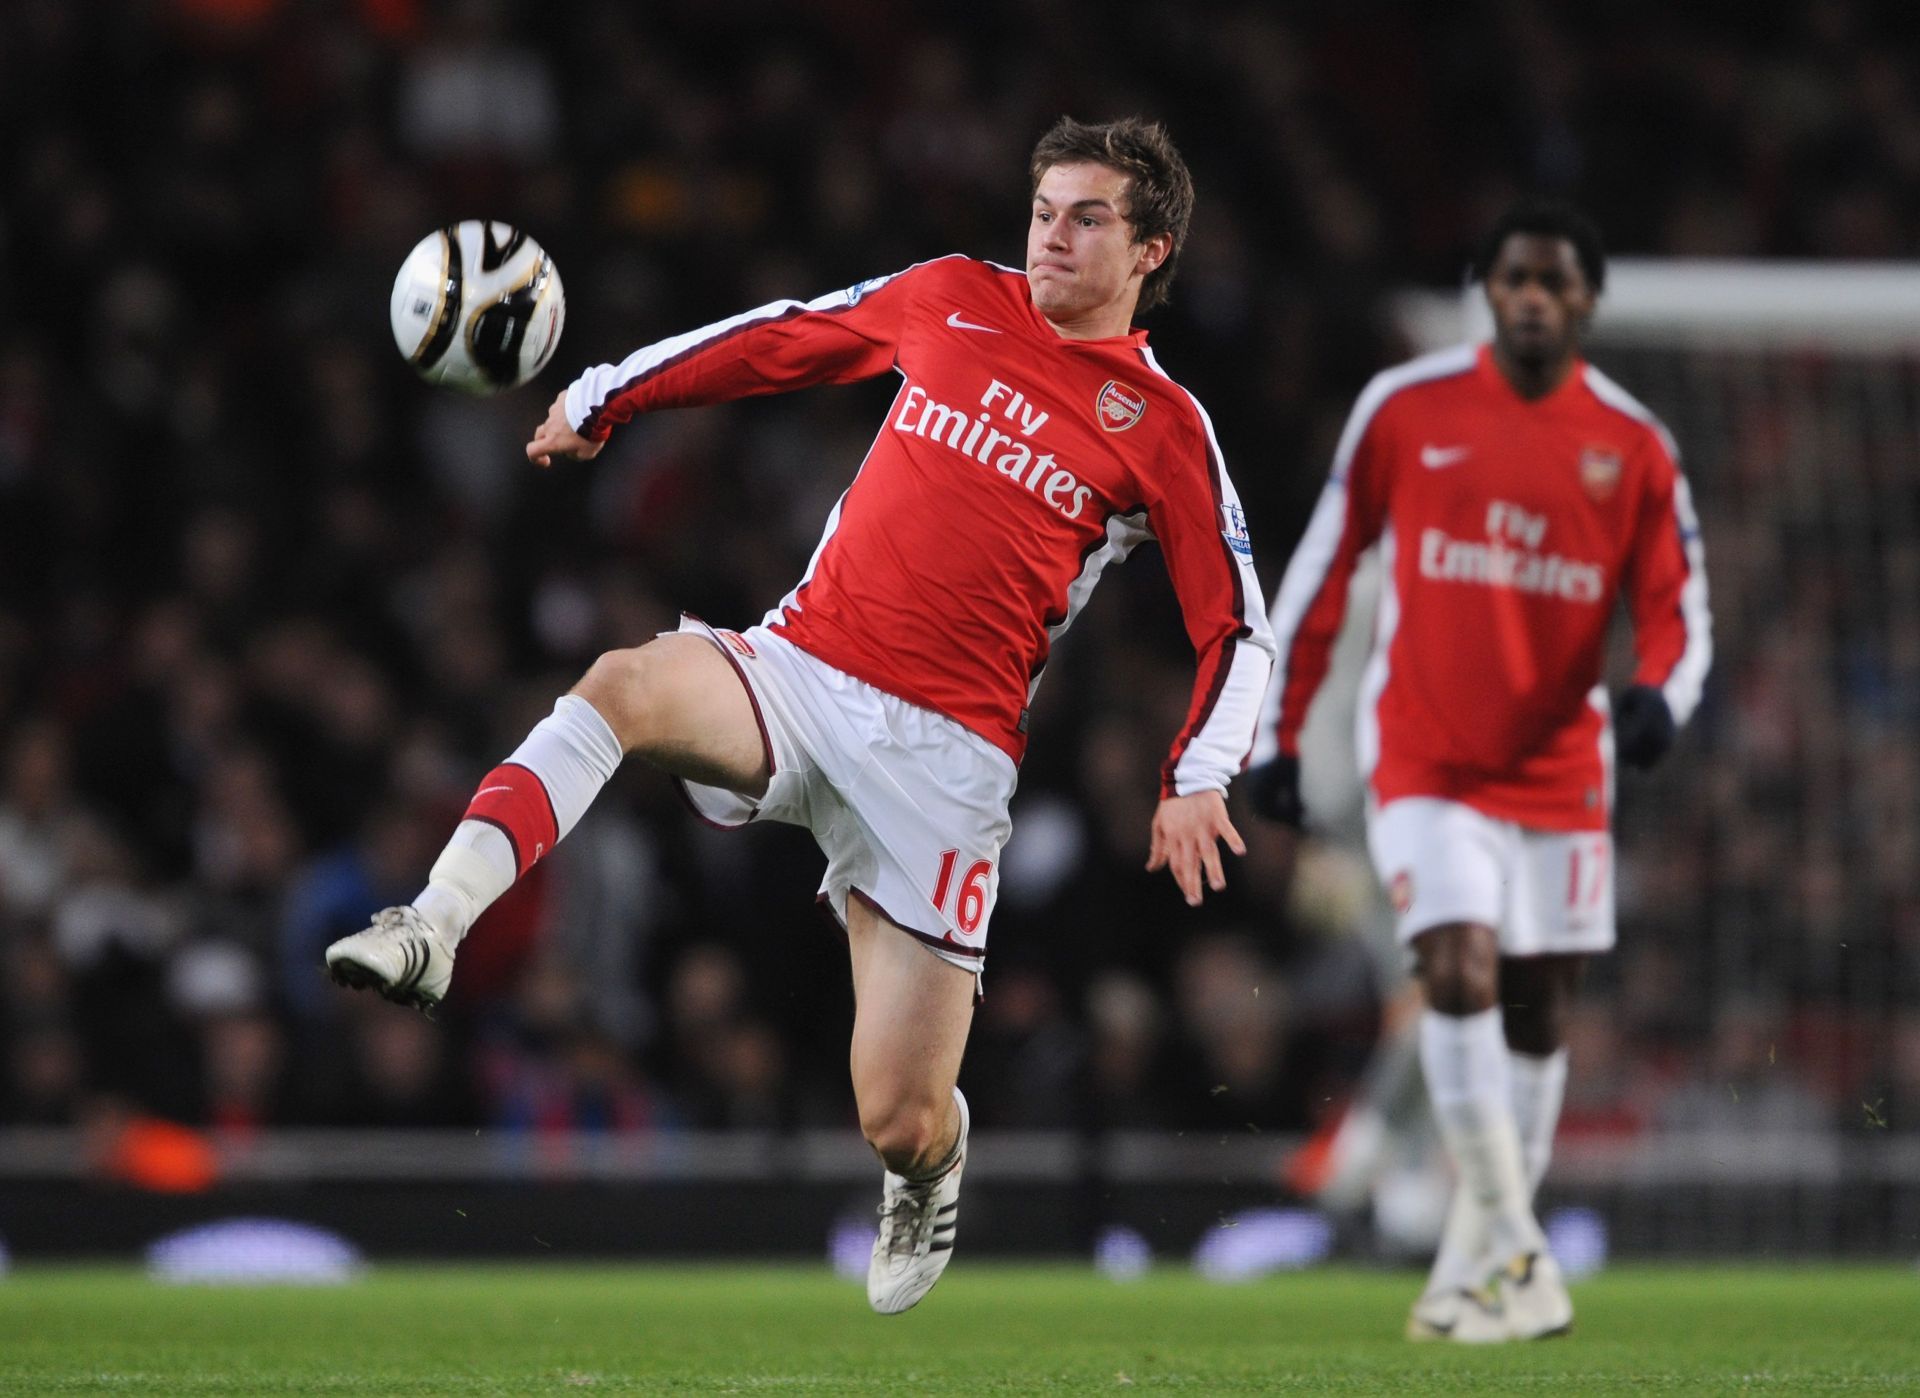 Aaron Ramsey in action against Wigan Athletic